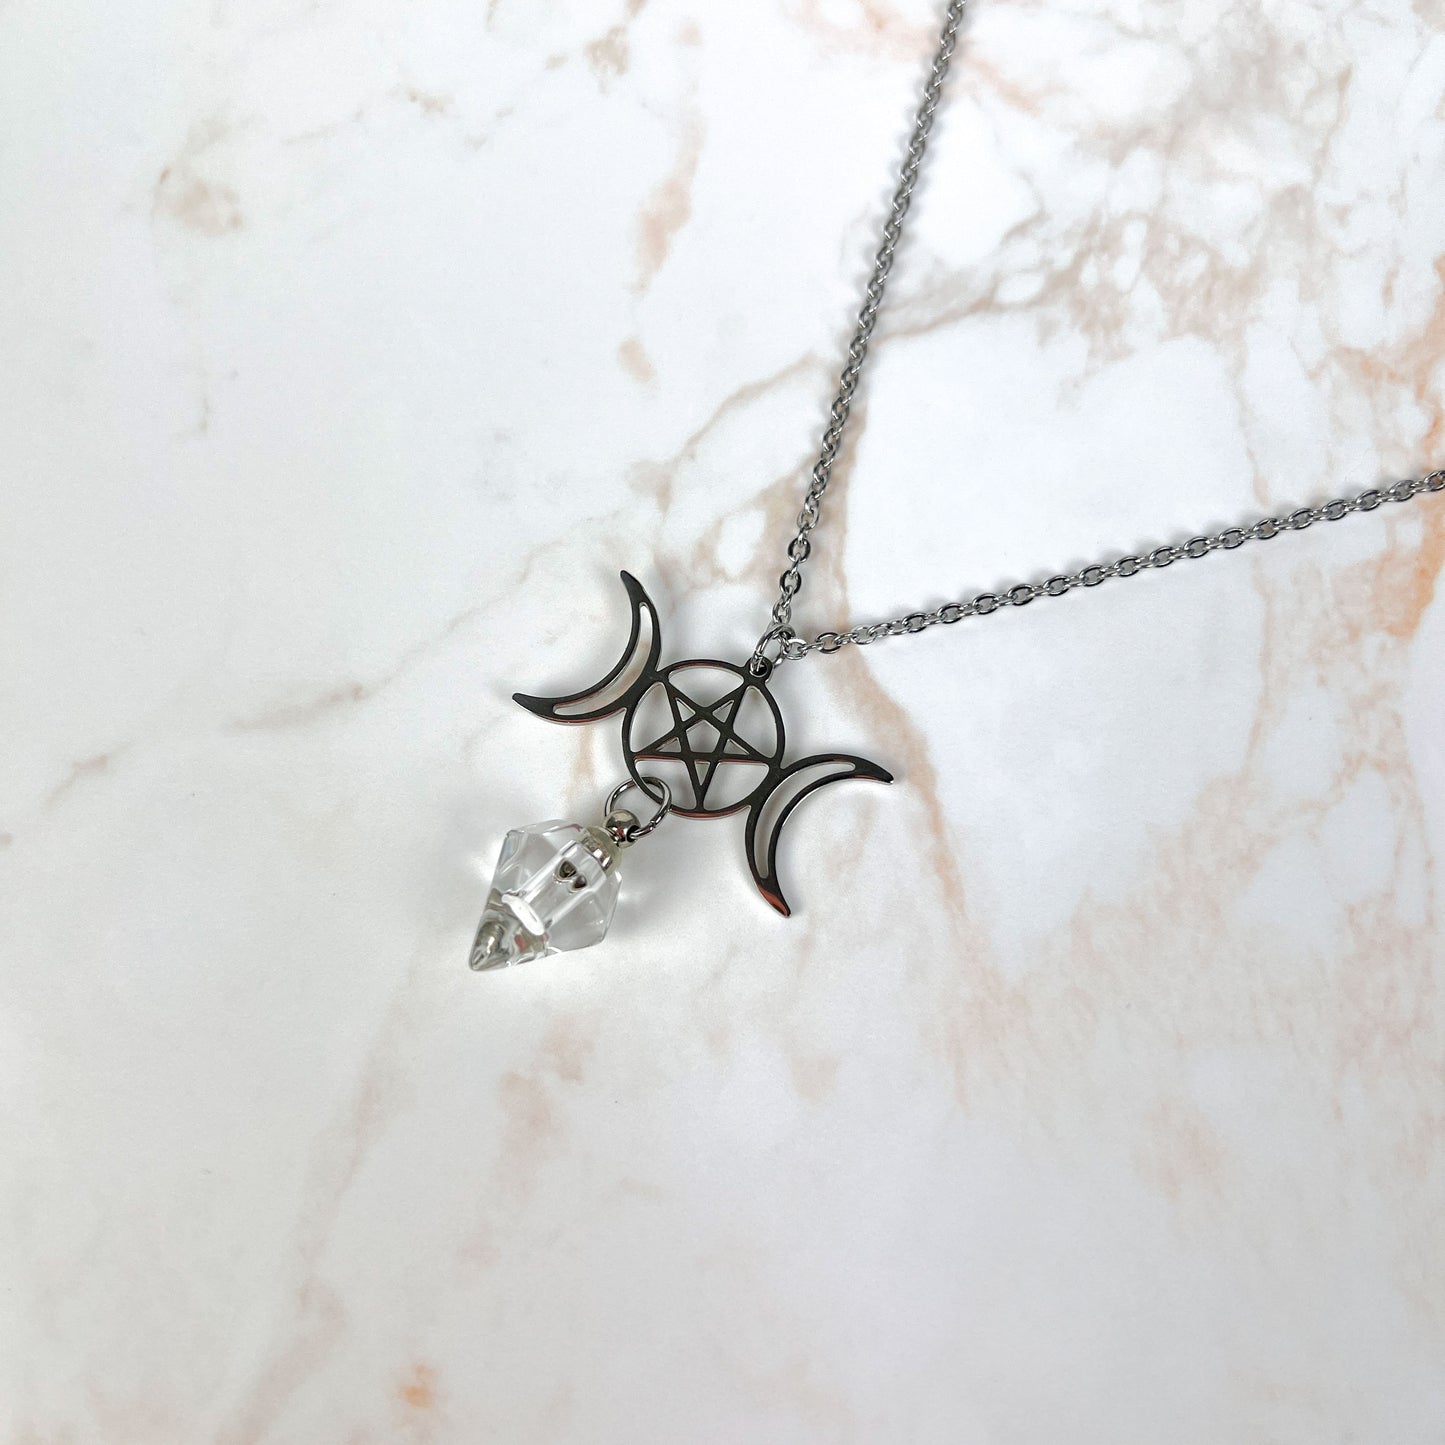 Triple Moon and pentacle potion necklace made of stainless steel Baguette Magick